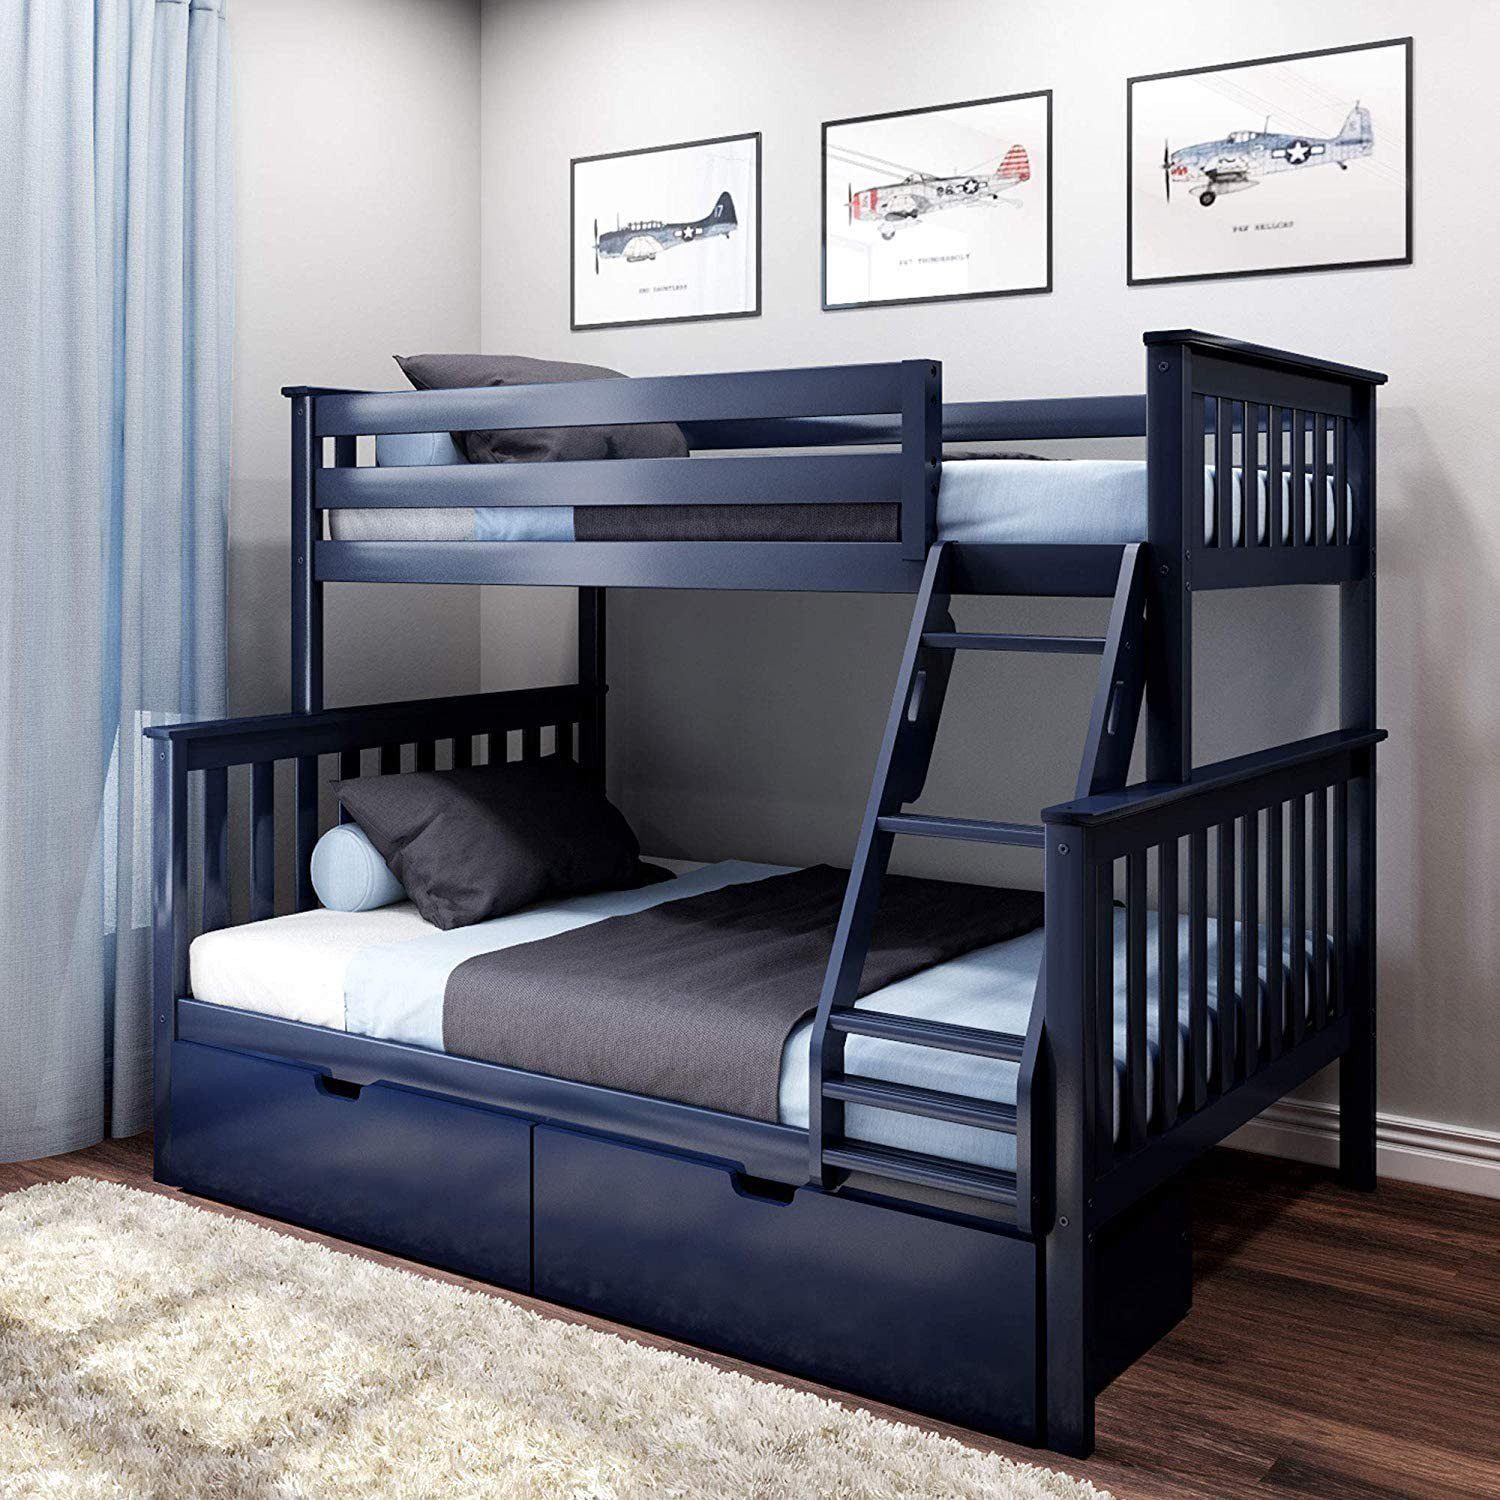 MAX & LILY SOLID WOOD TWIN OVER FULL BUNK BED IN BLUE WITH STORAGE